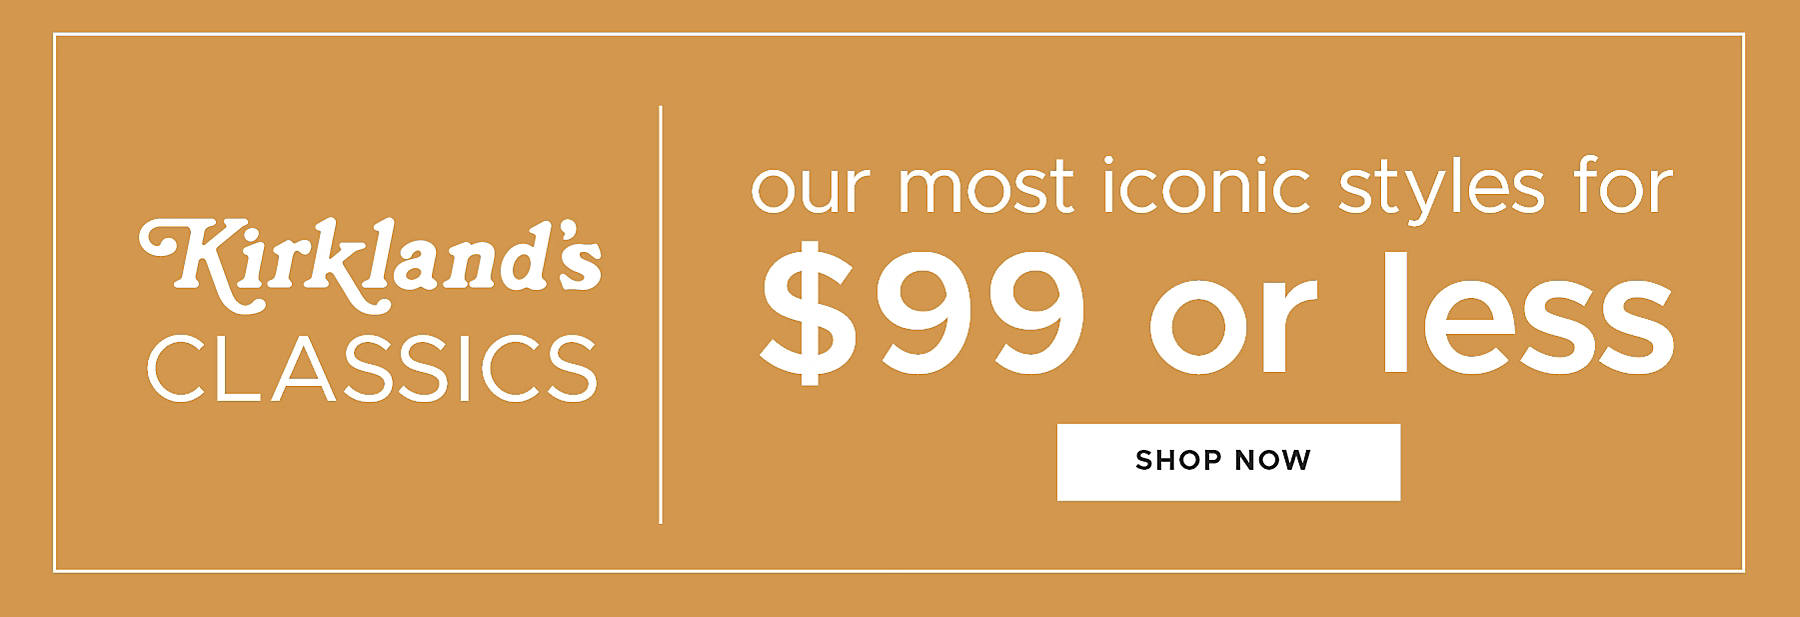 Kirkland's Classics our most iconic styles for $99 or less Shop Now